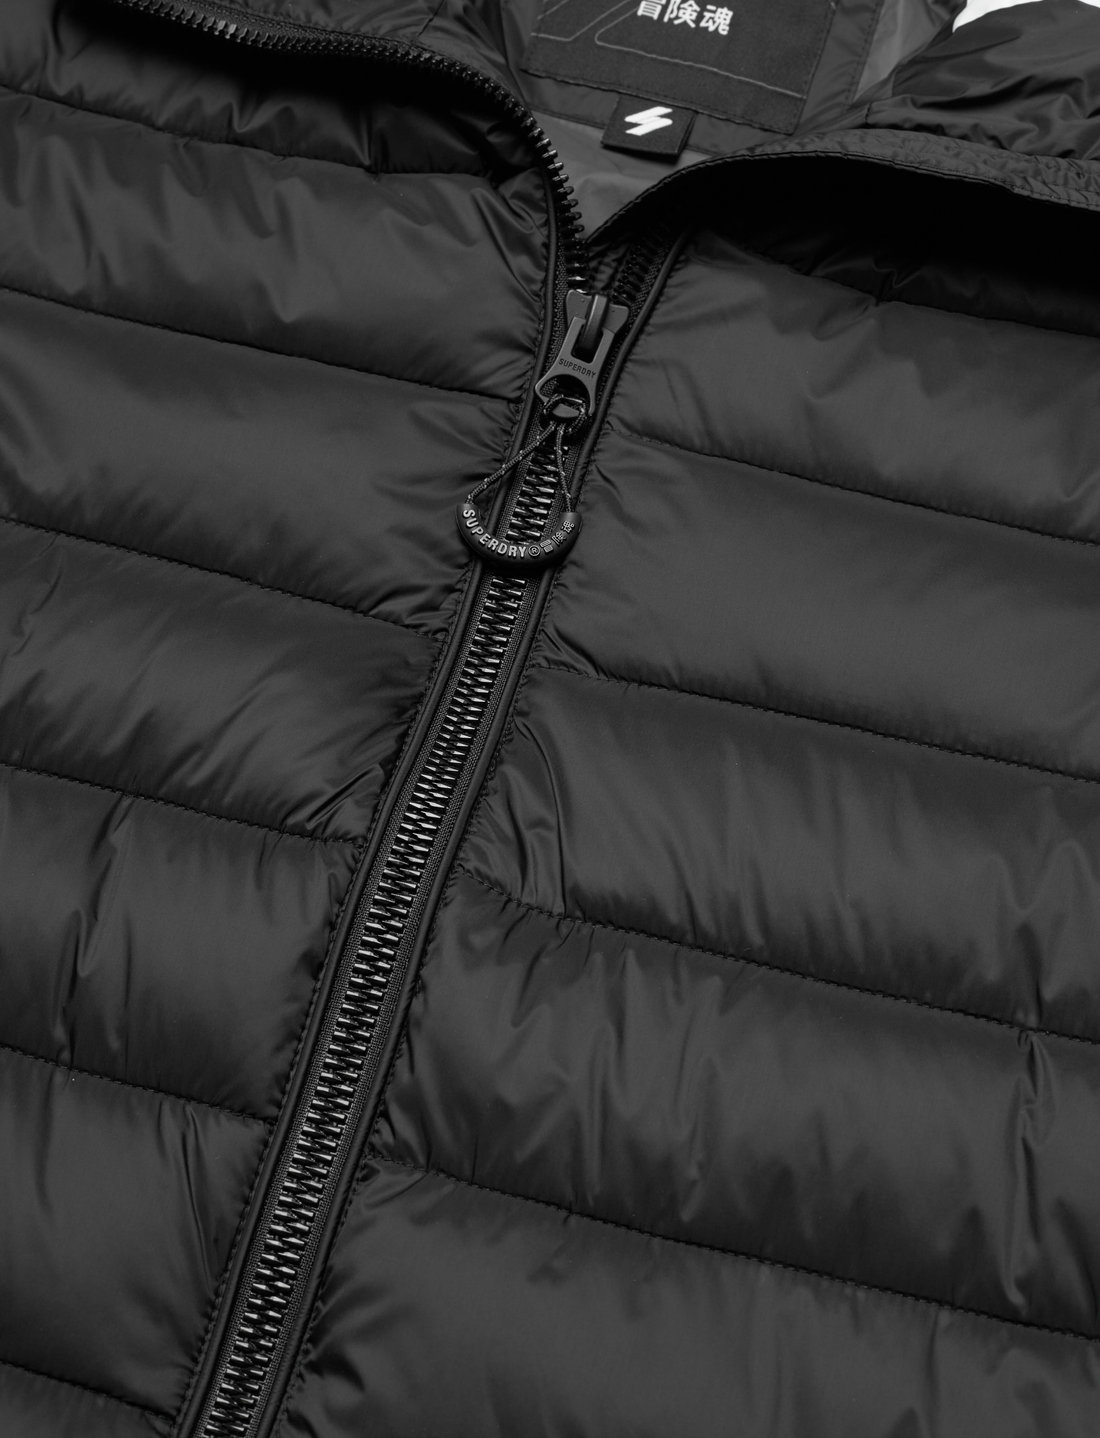 Superdry Code Mtn Non Hood Fuji Jkt - 99.99 €. Buy Padded jackets from  Superdry online at Boozt.com. Fast delivery and easy returns